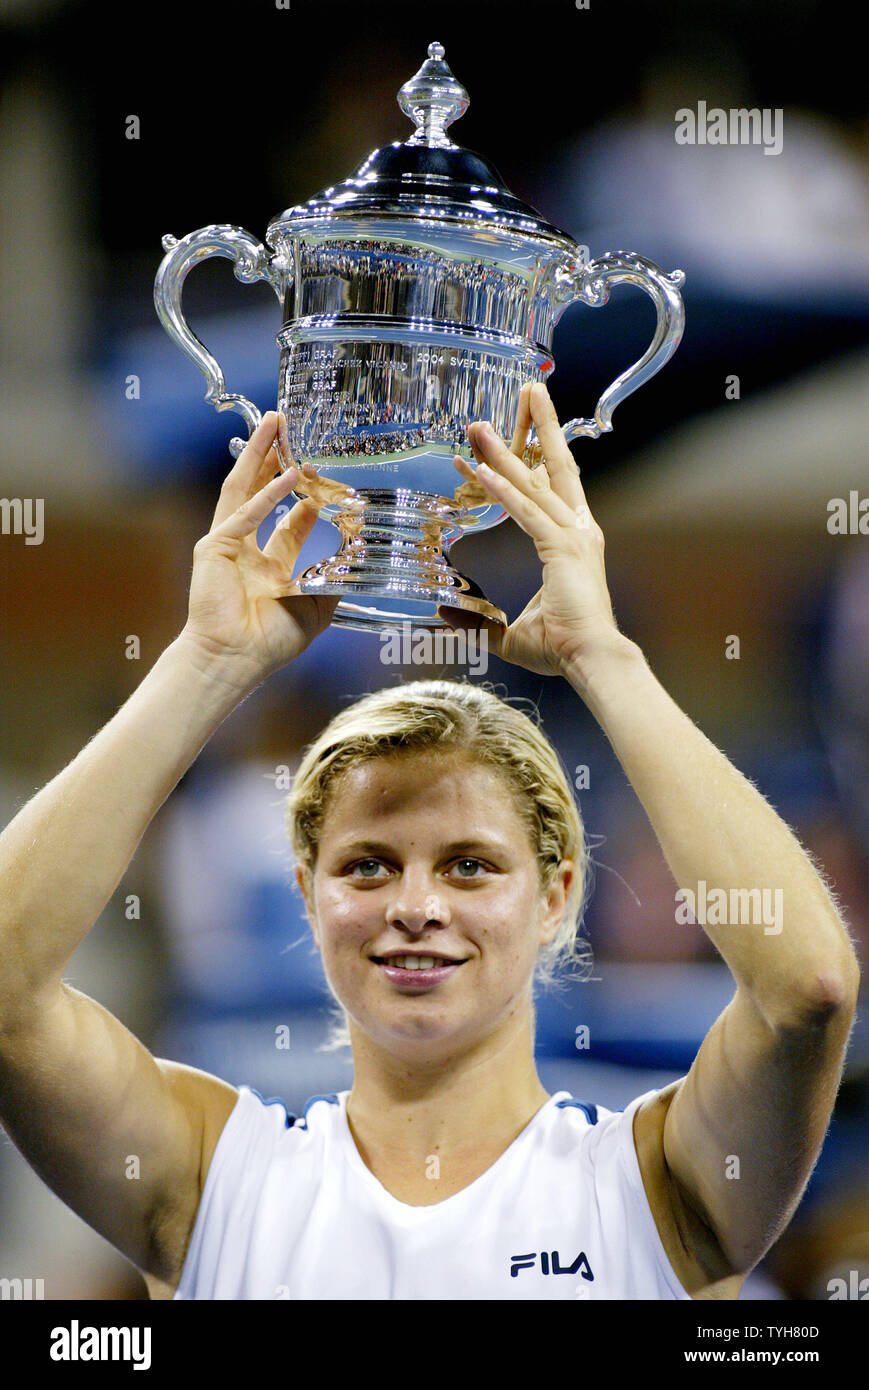 Kim Clijsters of Belgium holds her US Open championship trophy after defeating Mary Pierce of France 6-3, 6-1 the US Open Tennis tournament held at the National Tennis Center on September 10, 2005 in New York City.  (UPI Photo/Monika Graff) Stock Photo